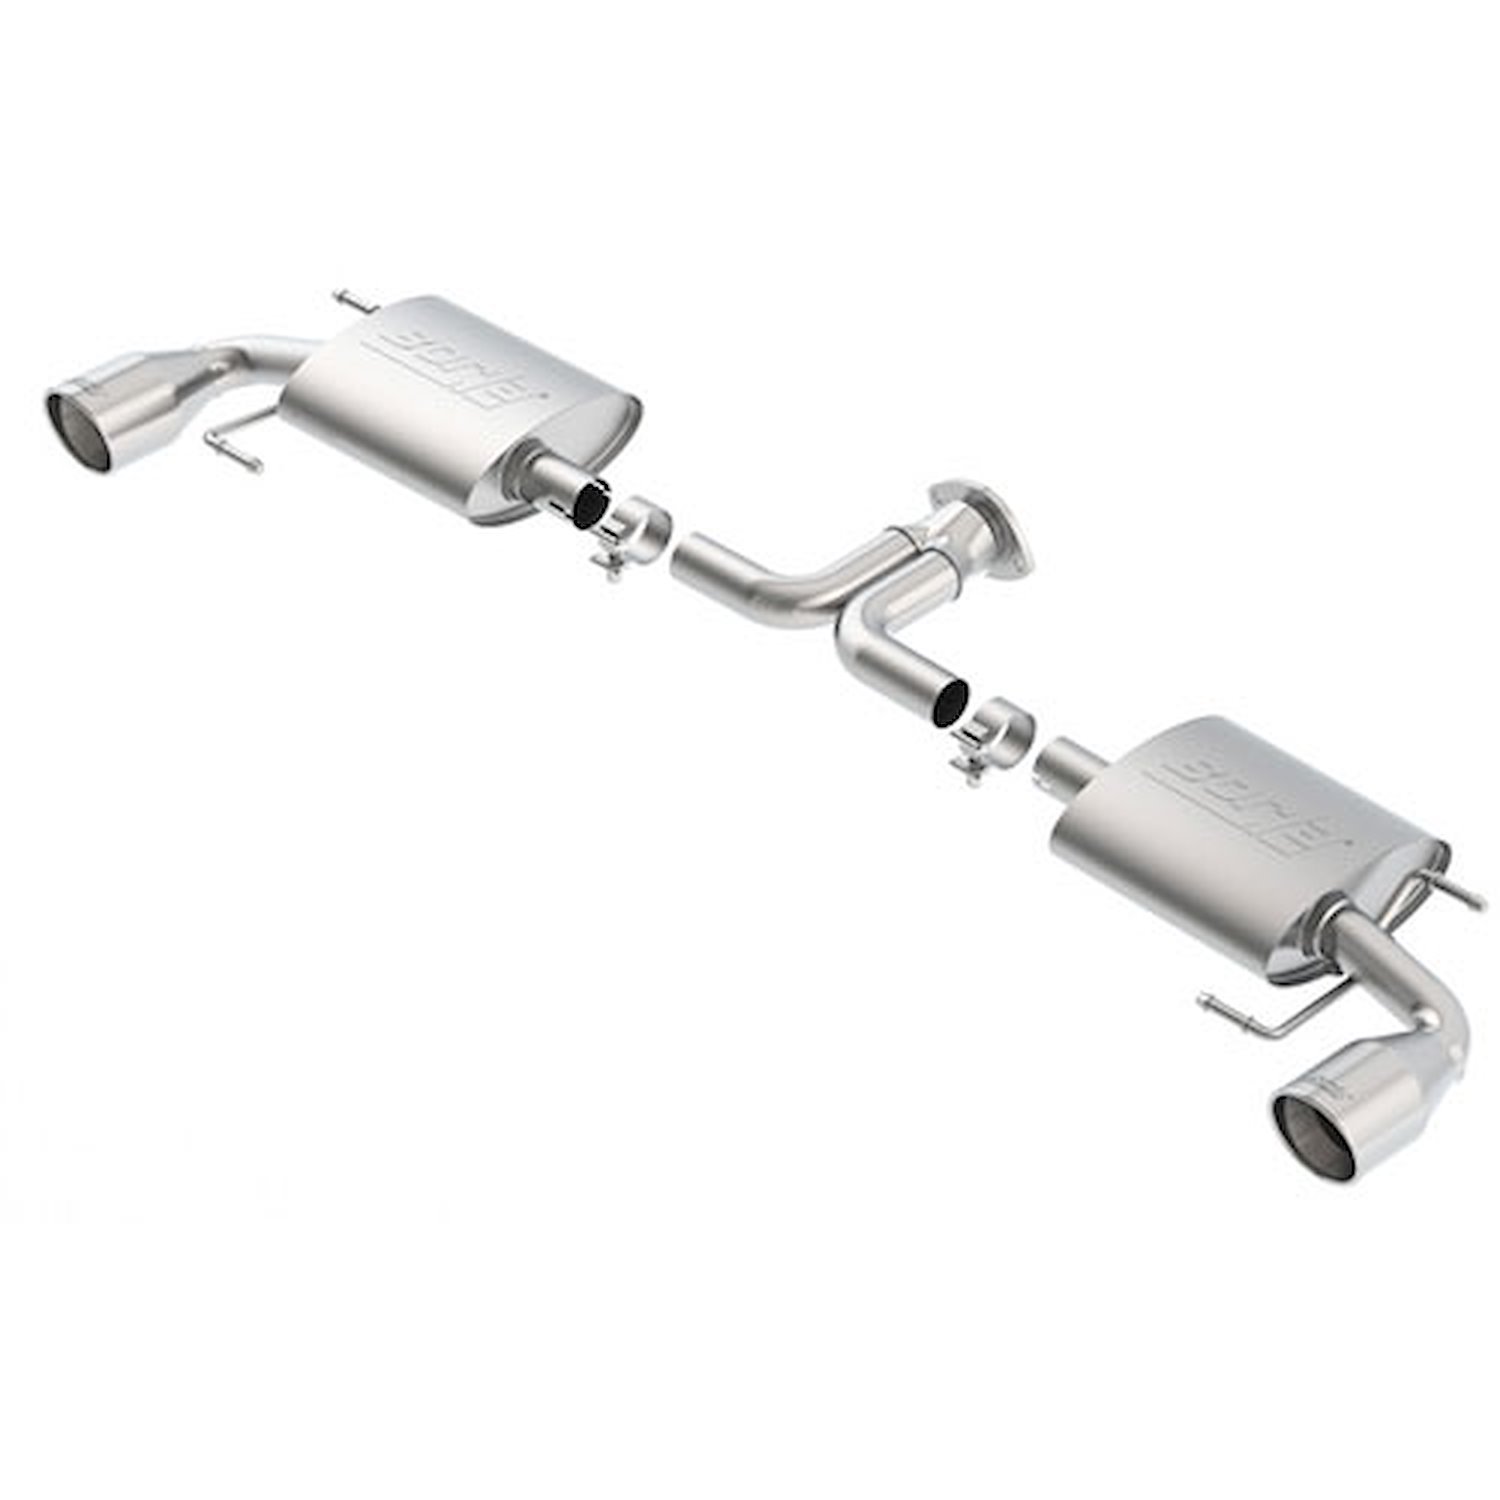 Rear-Section Exhaust System 2014-2018 Mazda 3 2.0L/2.5L